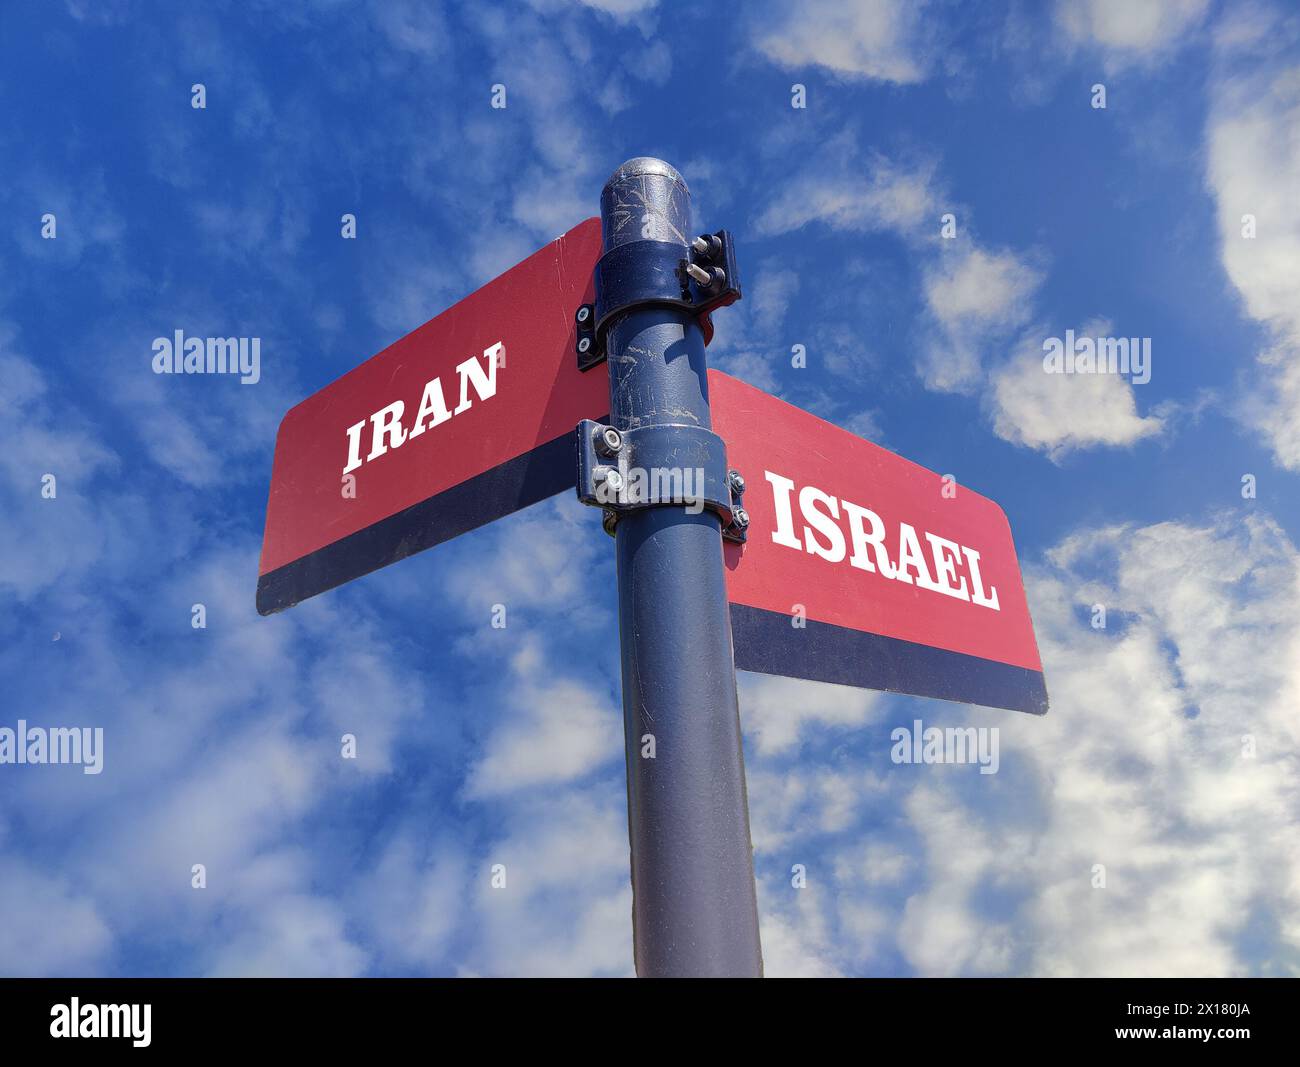 3d illustration, Red and black sign with the words Iran and Israel written in white on the crossroads. Stock Photo